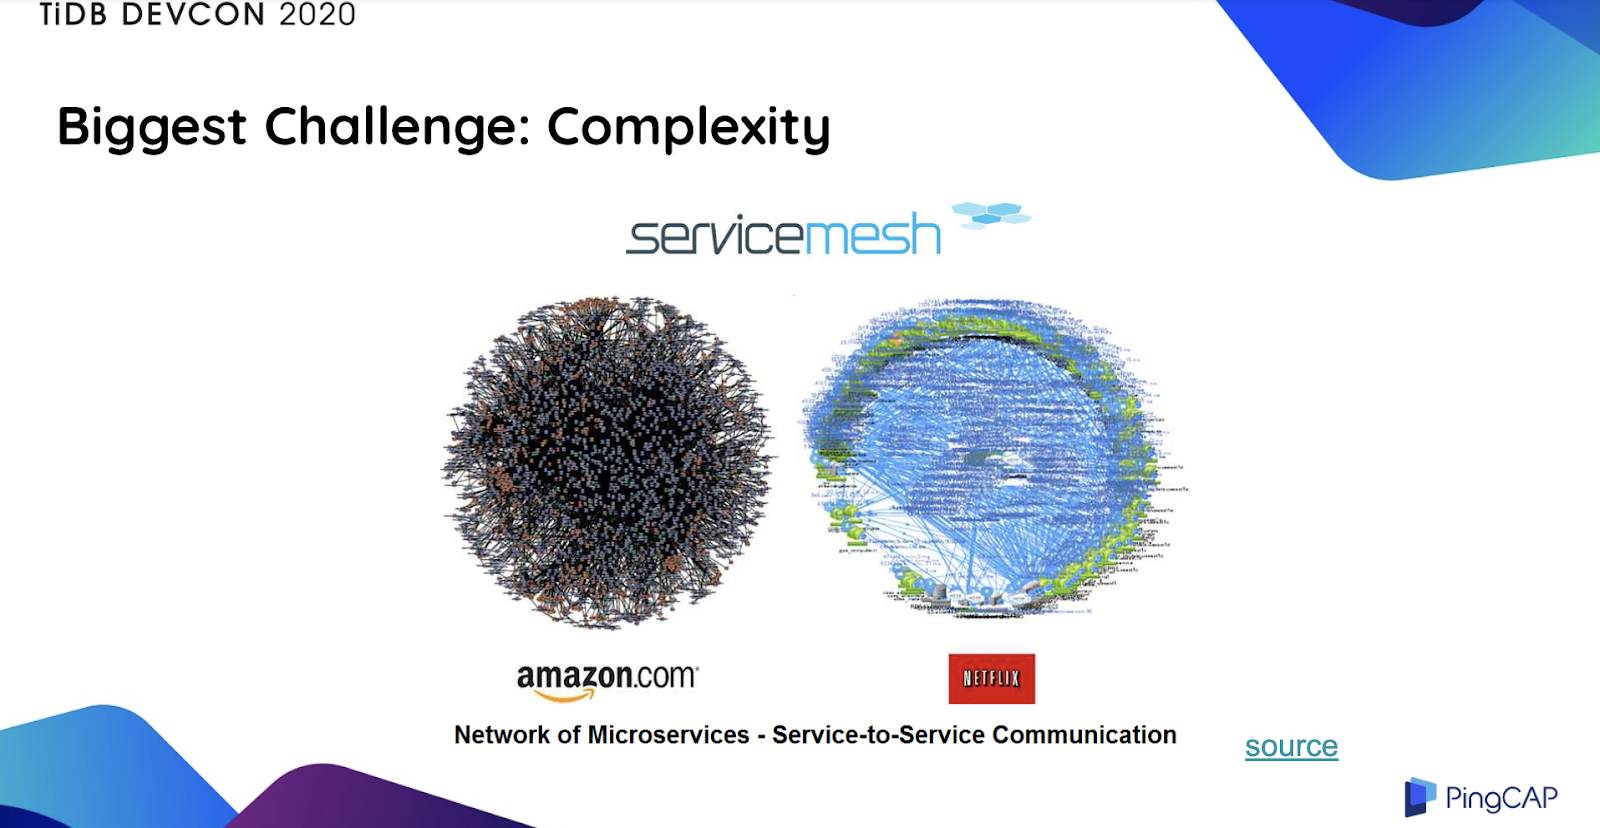 Amazon's and Netflix's microservices